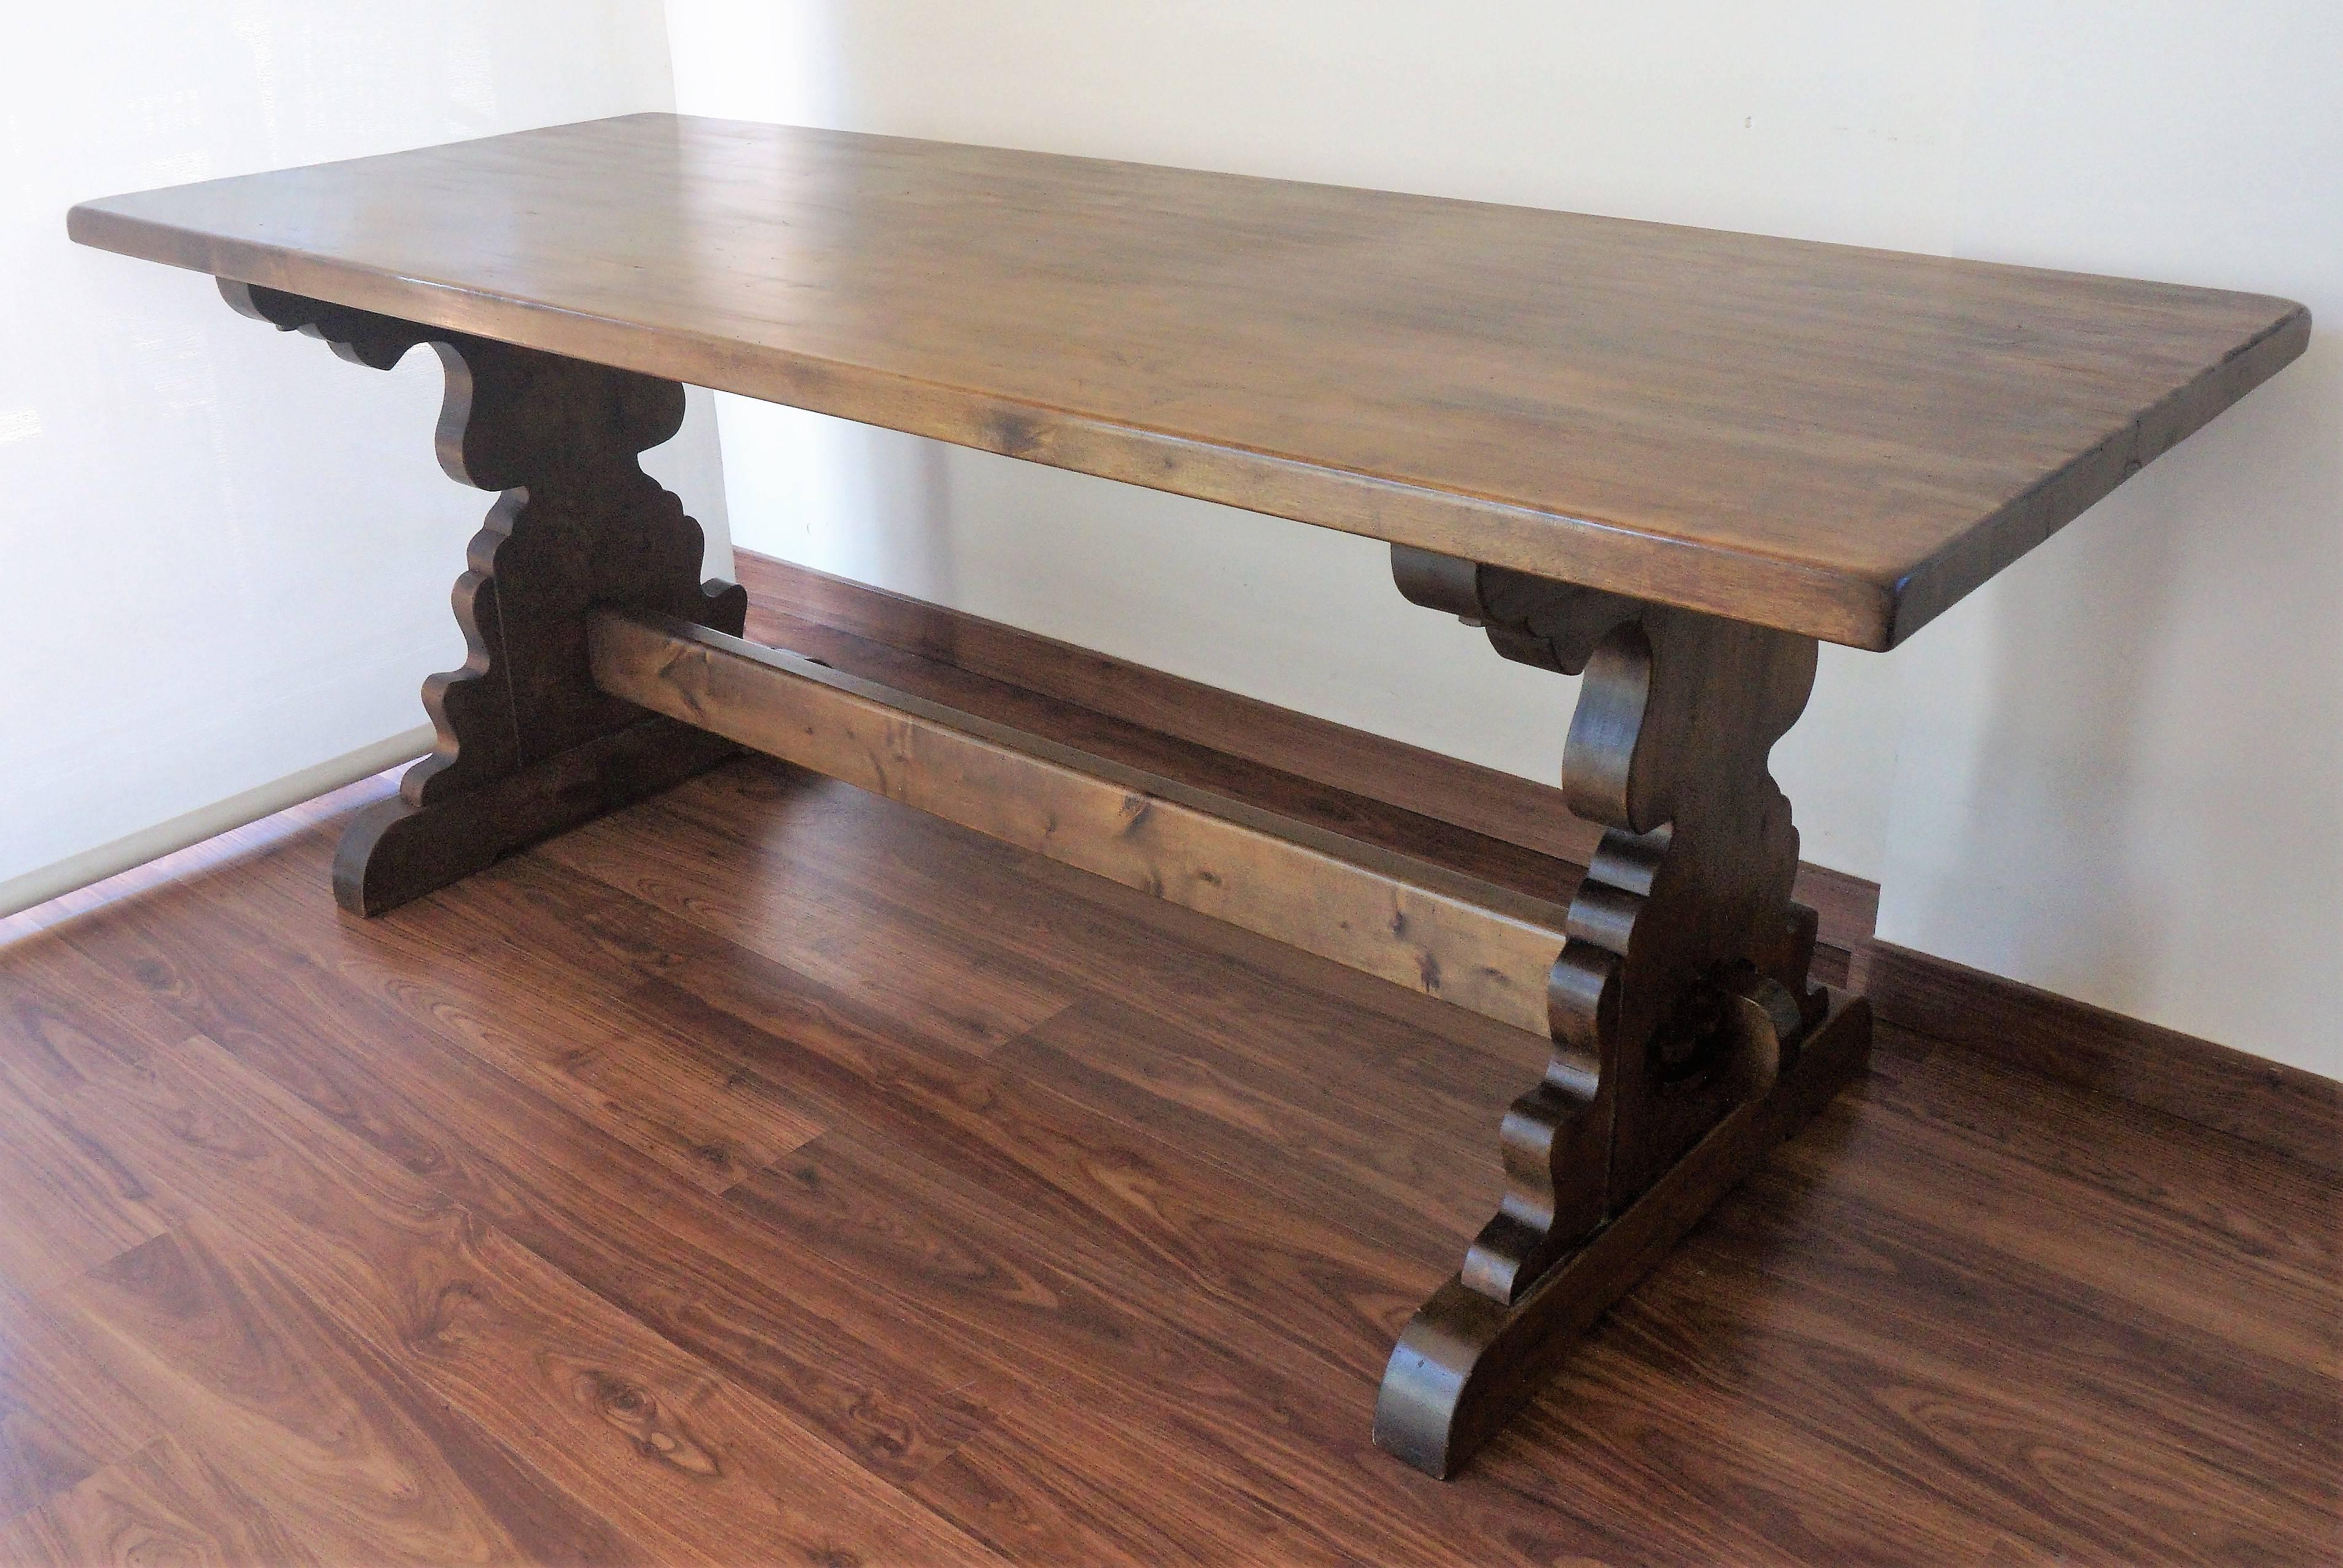 Spanish Colonial Spanish Rustic Dining Room Table with Lyre Leg